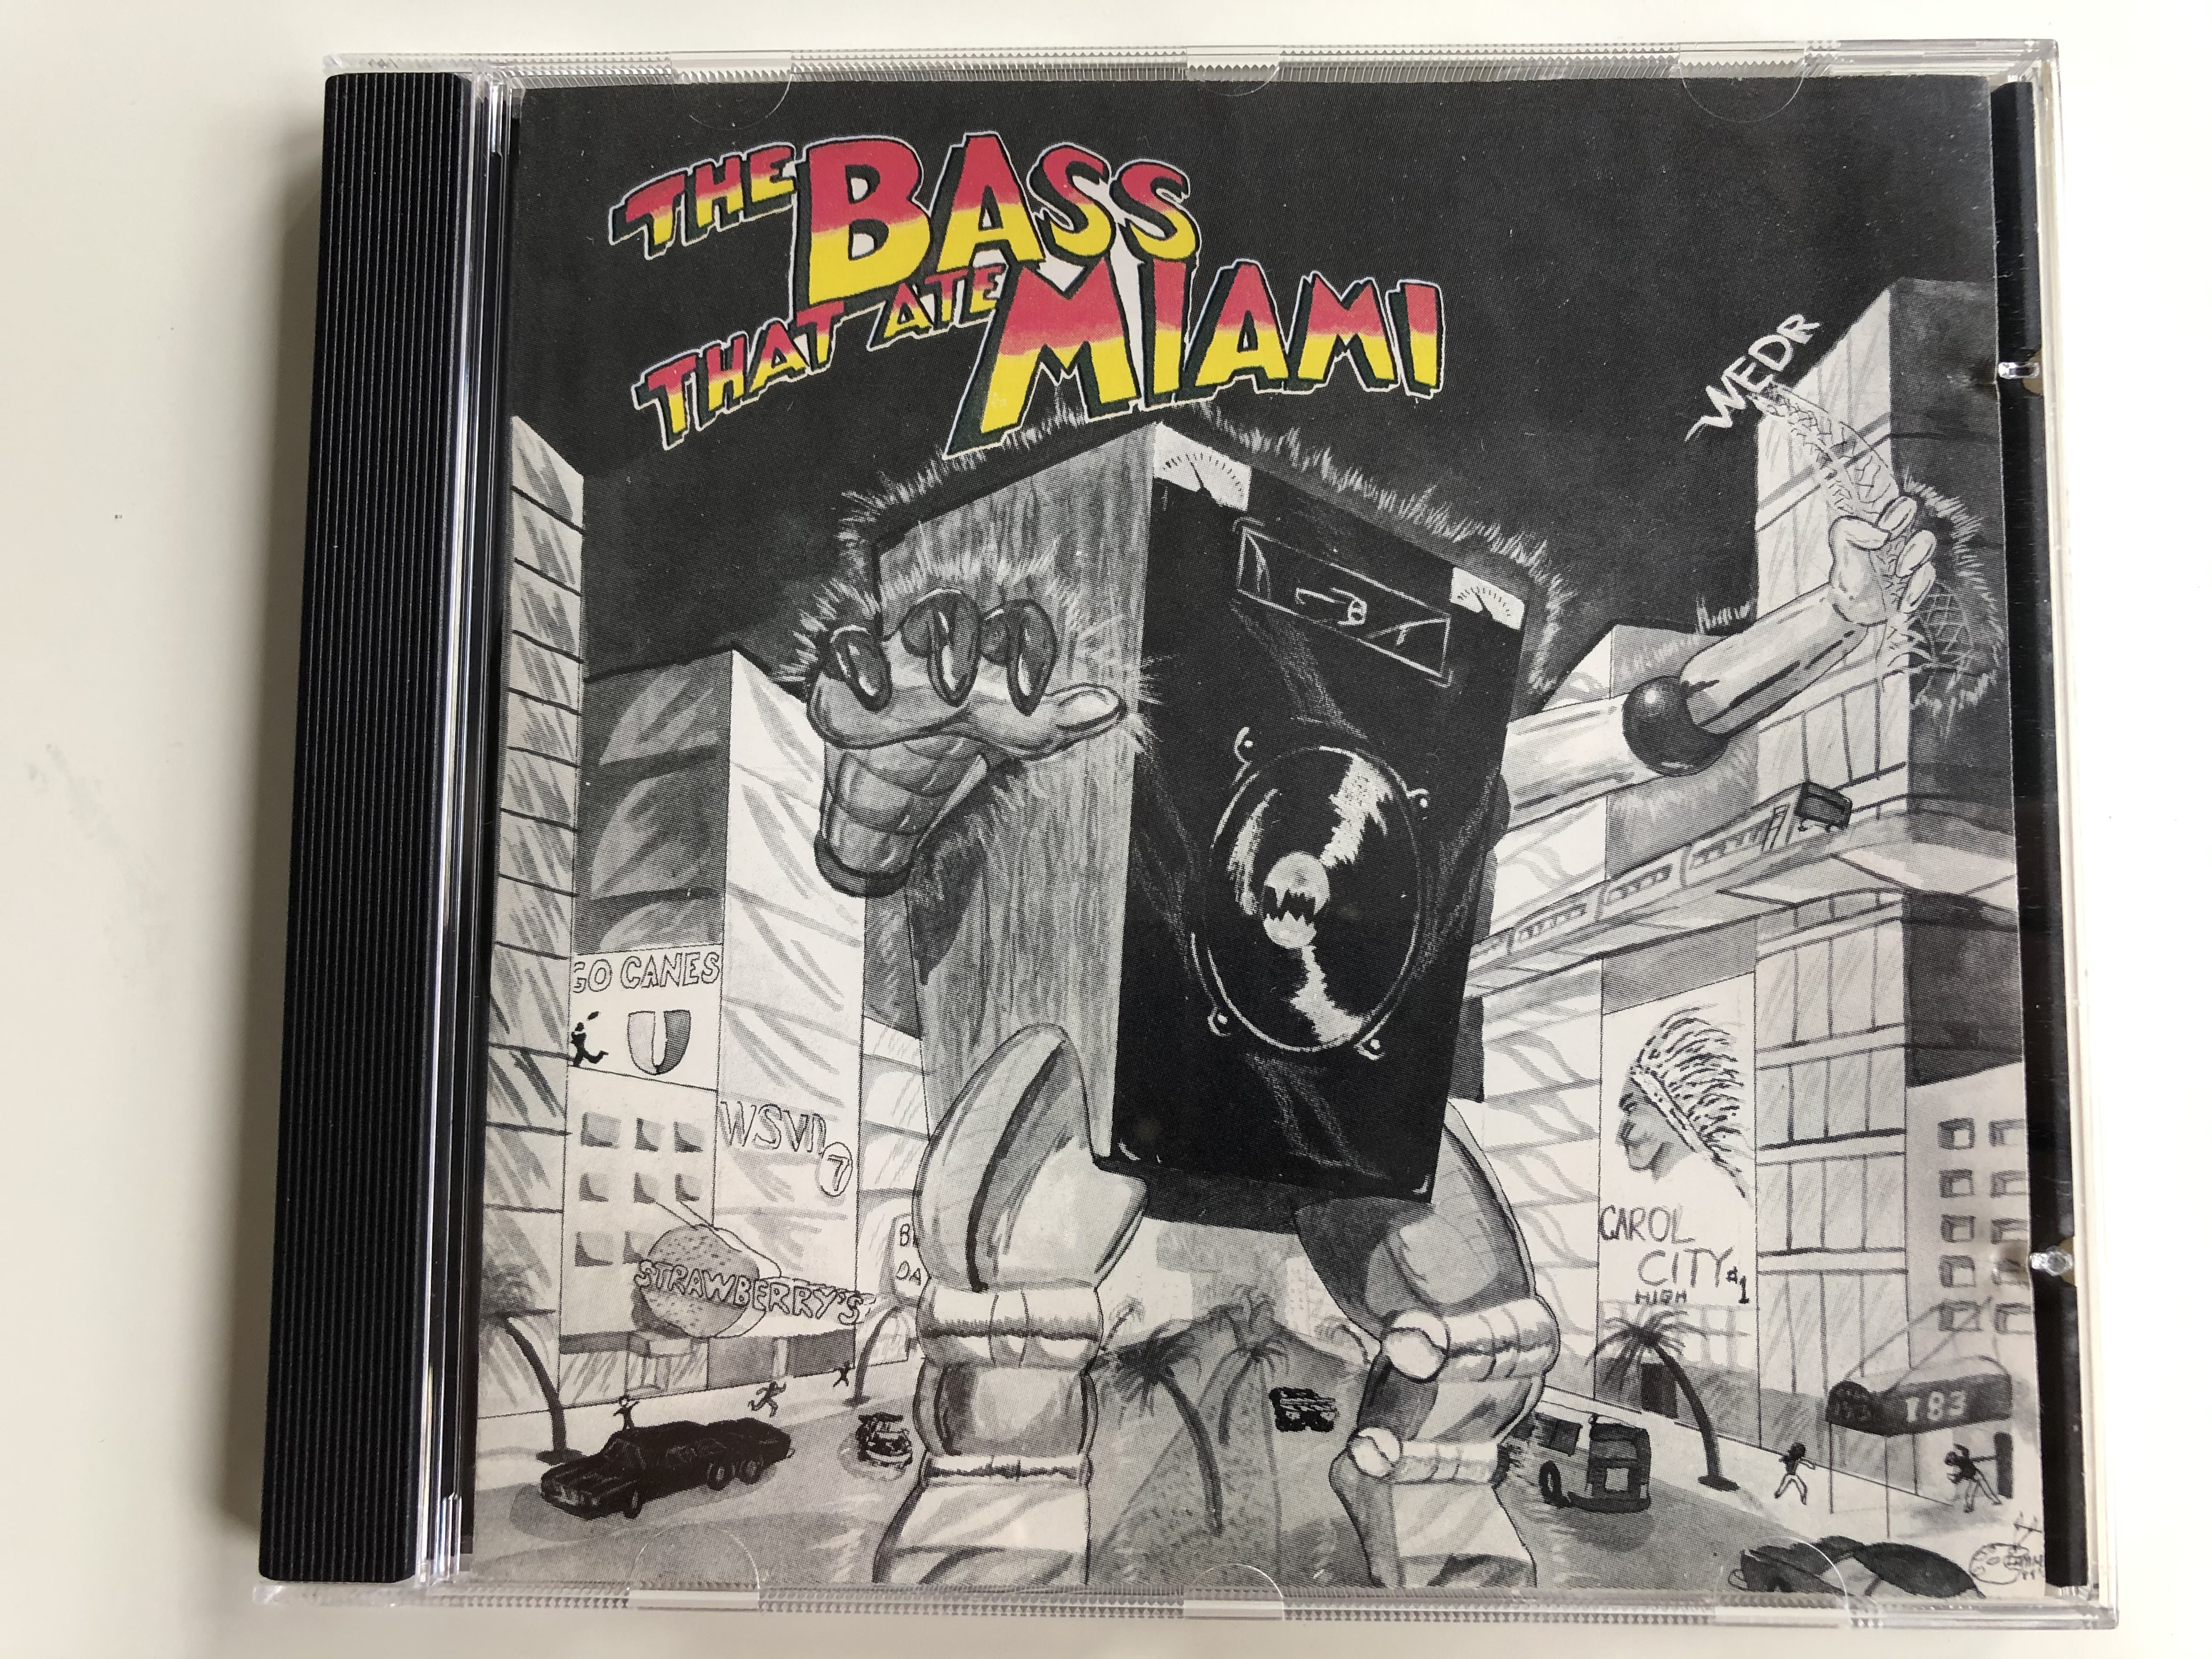 the-bass-that-ate-miami-pandisc-audio-cd-1989-pd-8801-1-.jpg